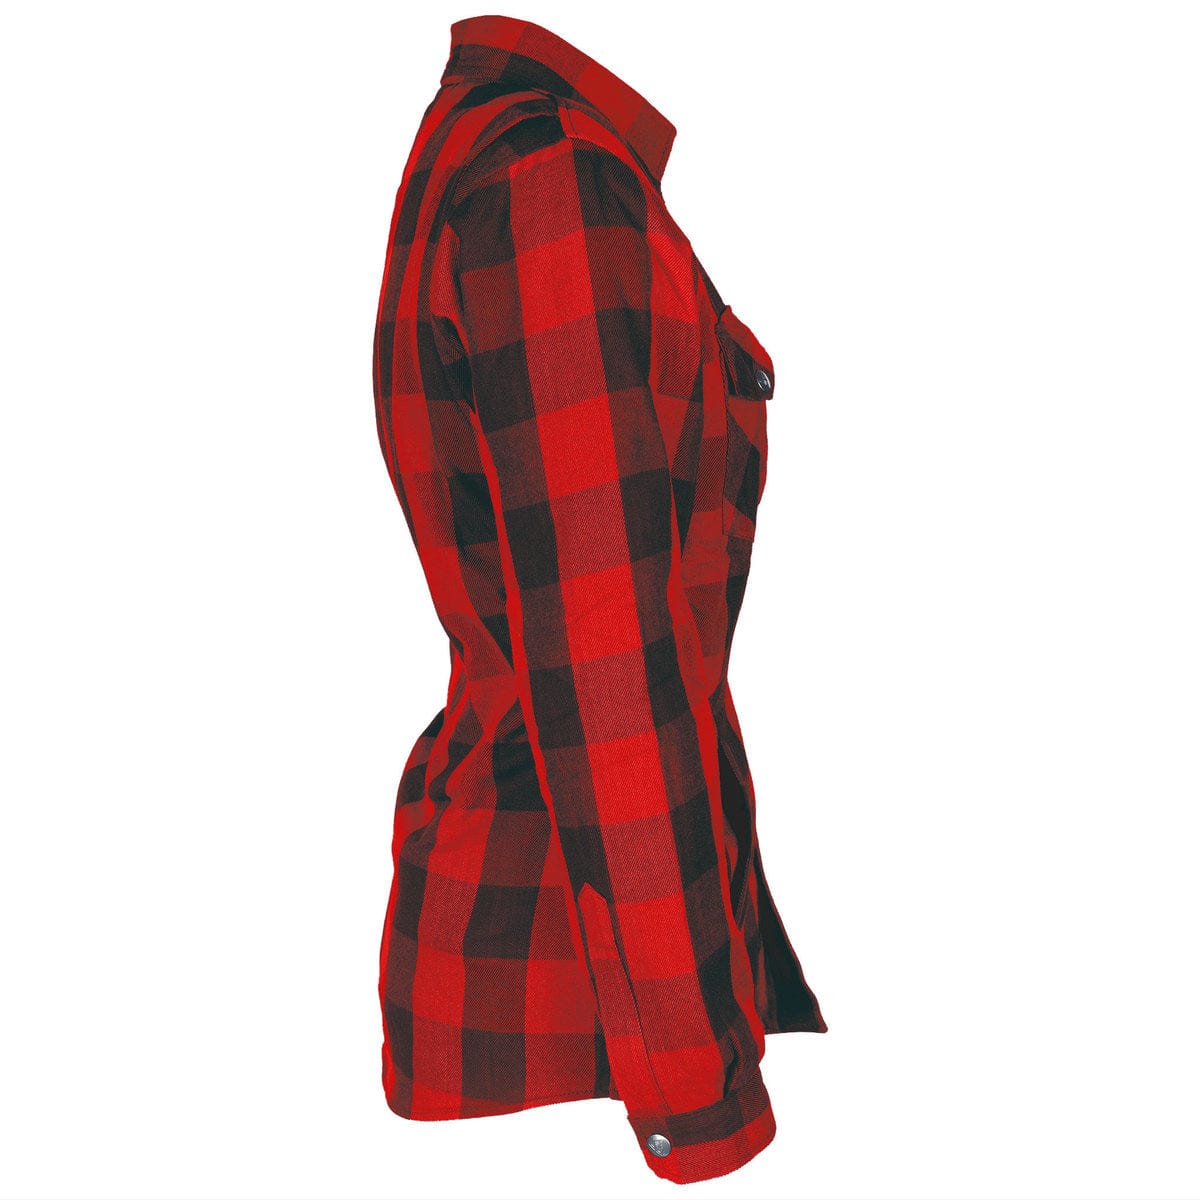 Protective Flannel Shirt for Women - Red Checkered with Pads